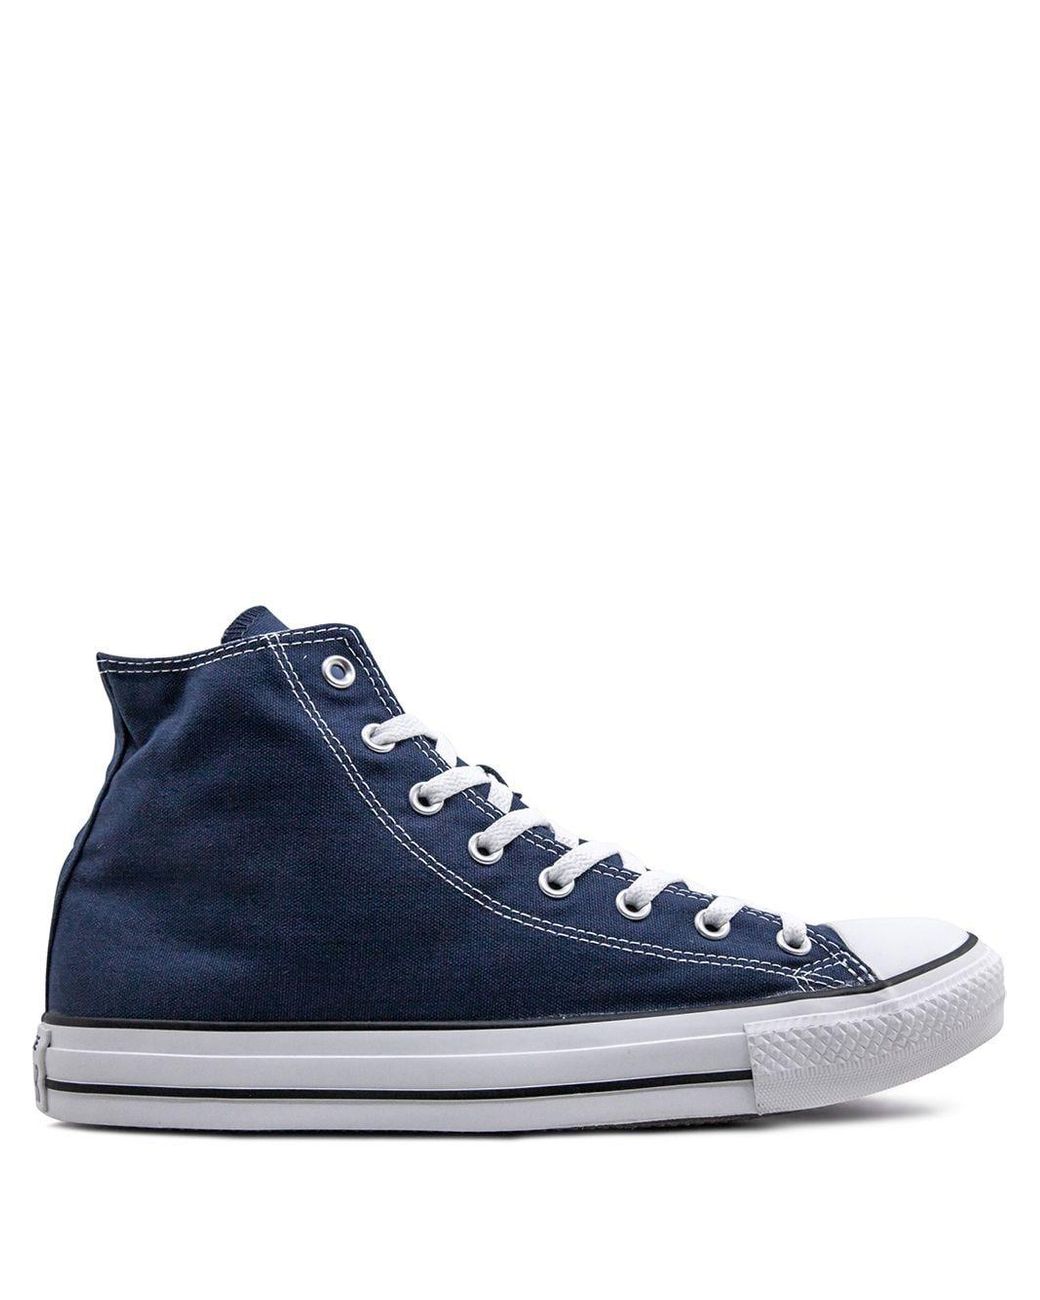 Converse Canvas All Star Hi Sneakers in Blue for Men - Lyst